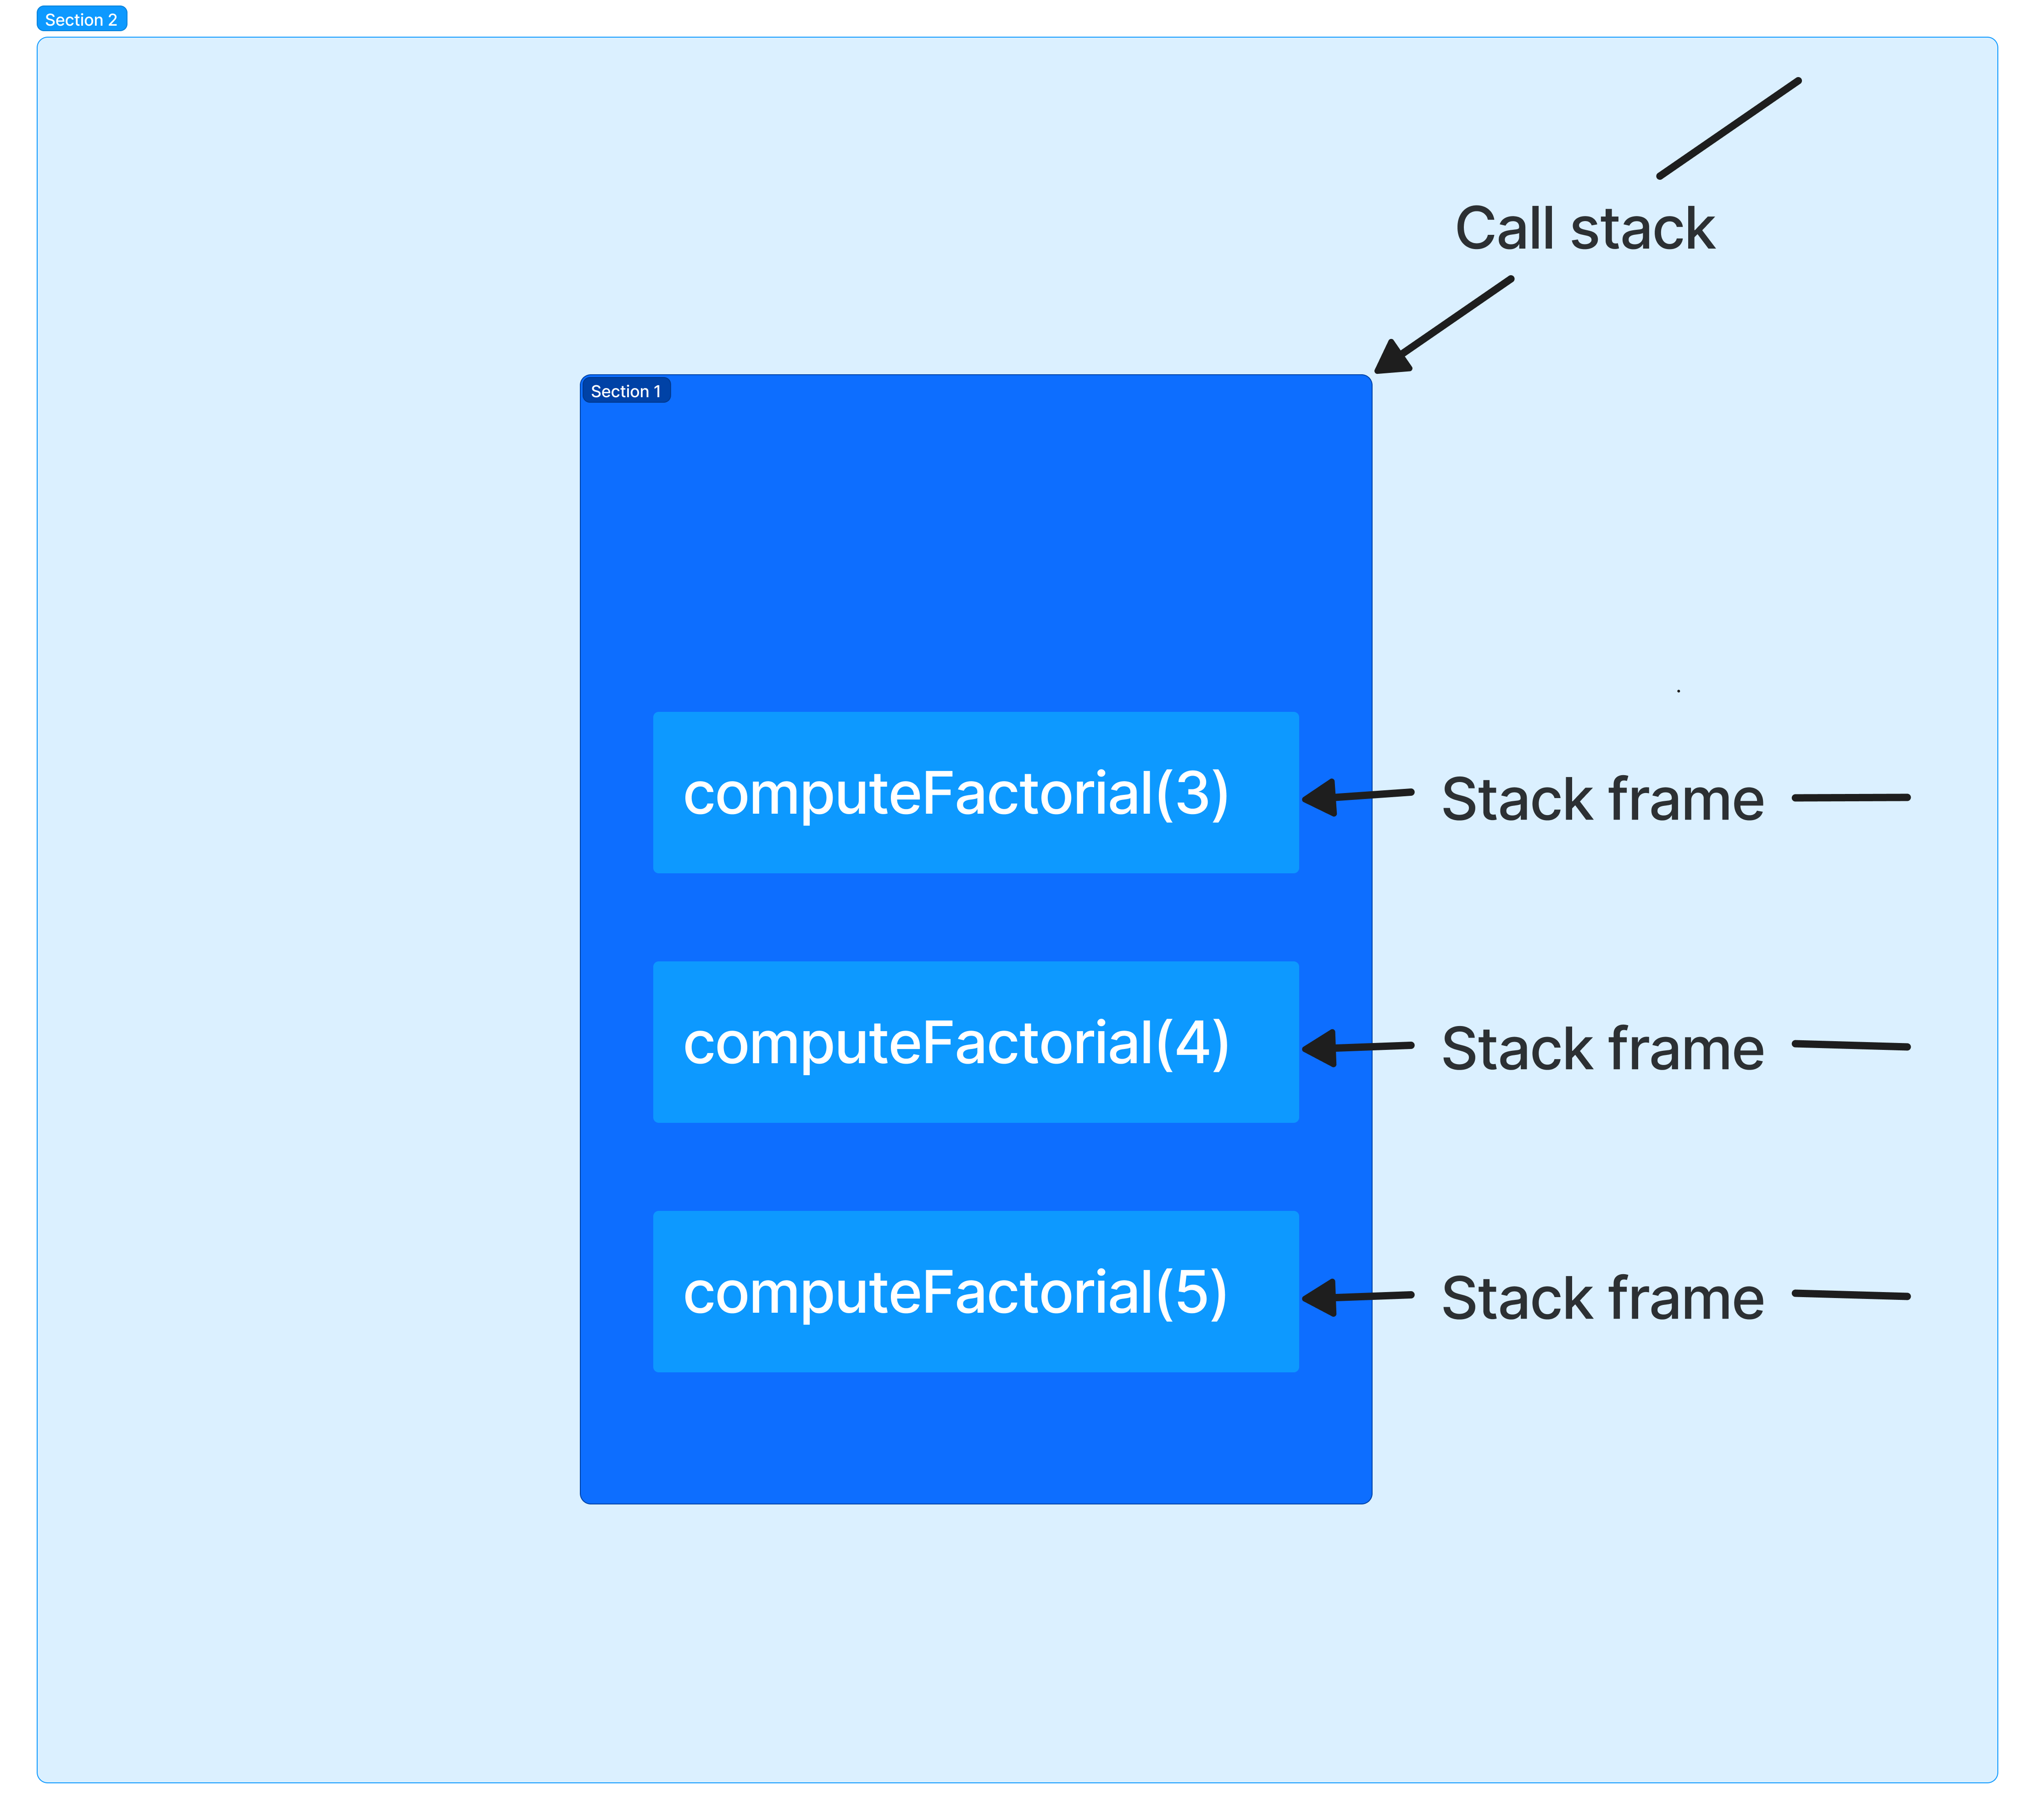  Illustration of a call stack and stack frames